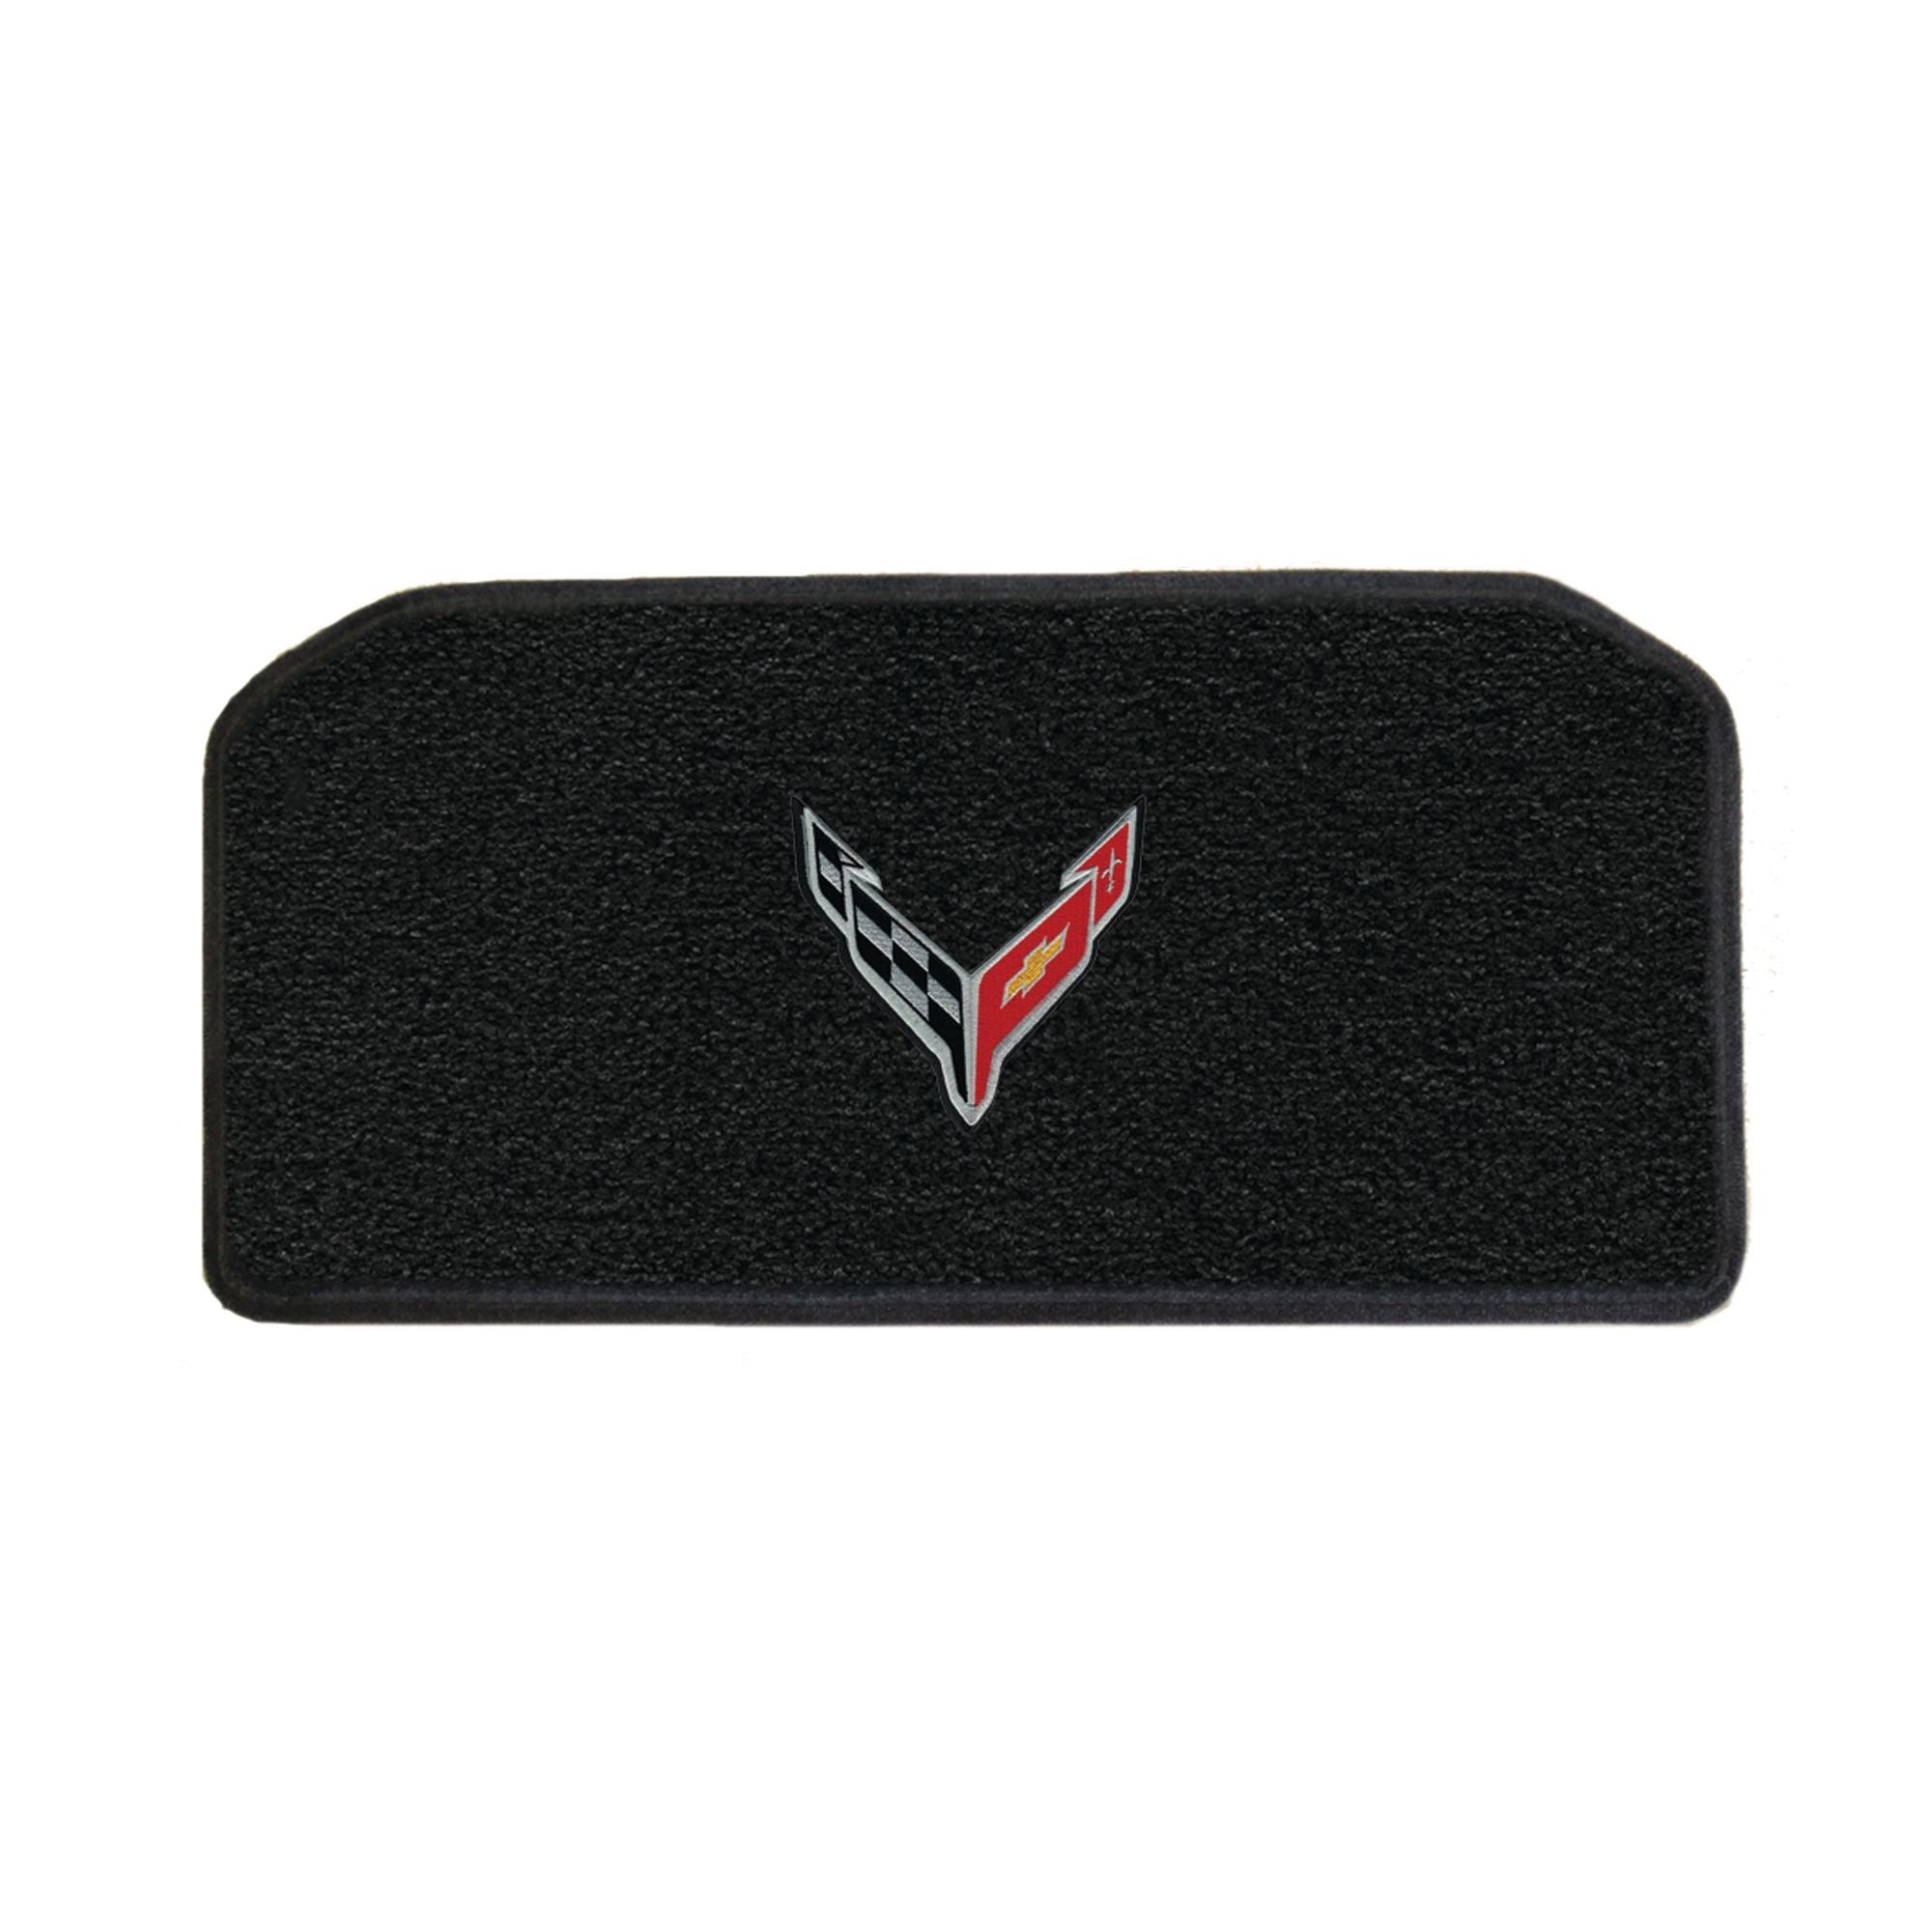 C8 Corvette Front Cargo Mats - Lloyds Mats with C8 Crossed Flags